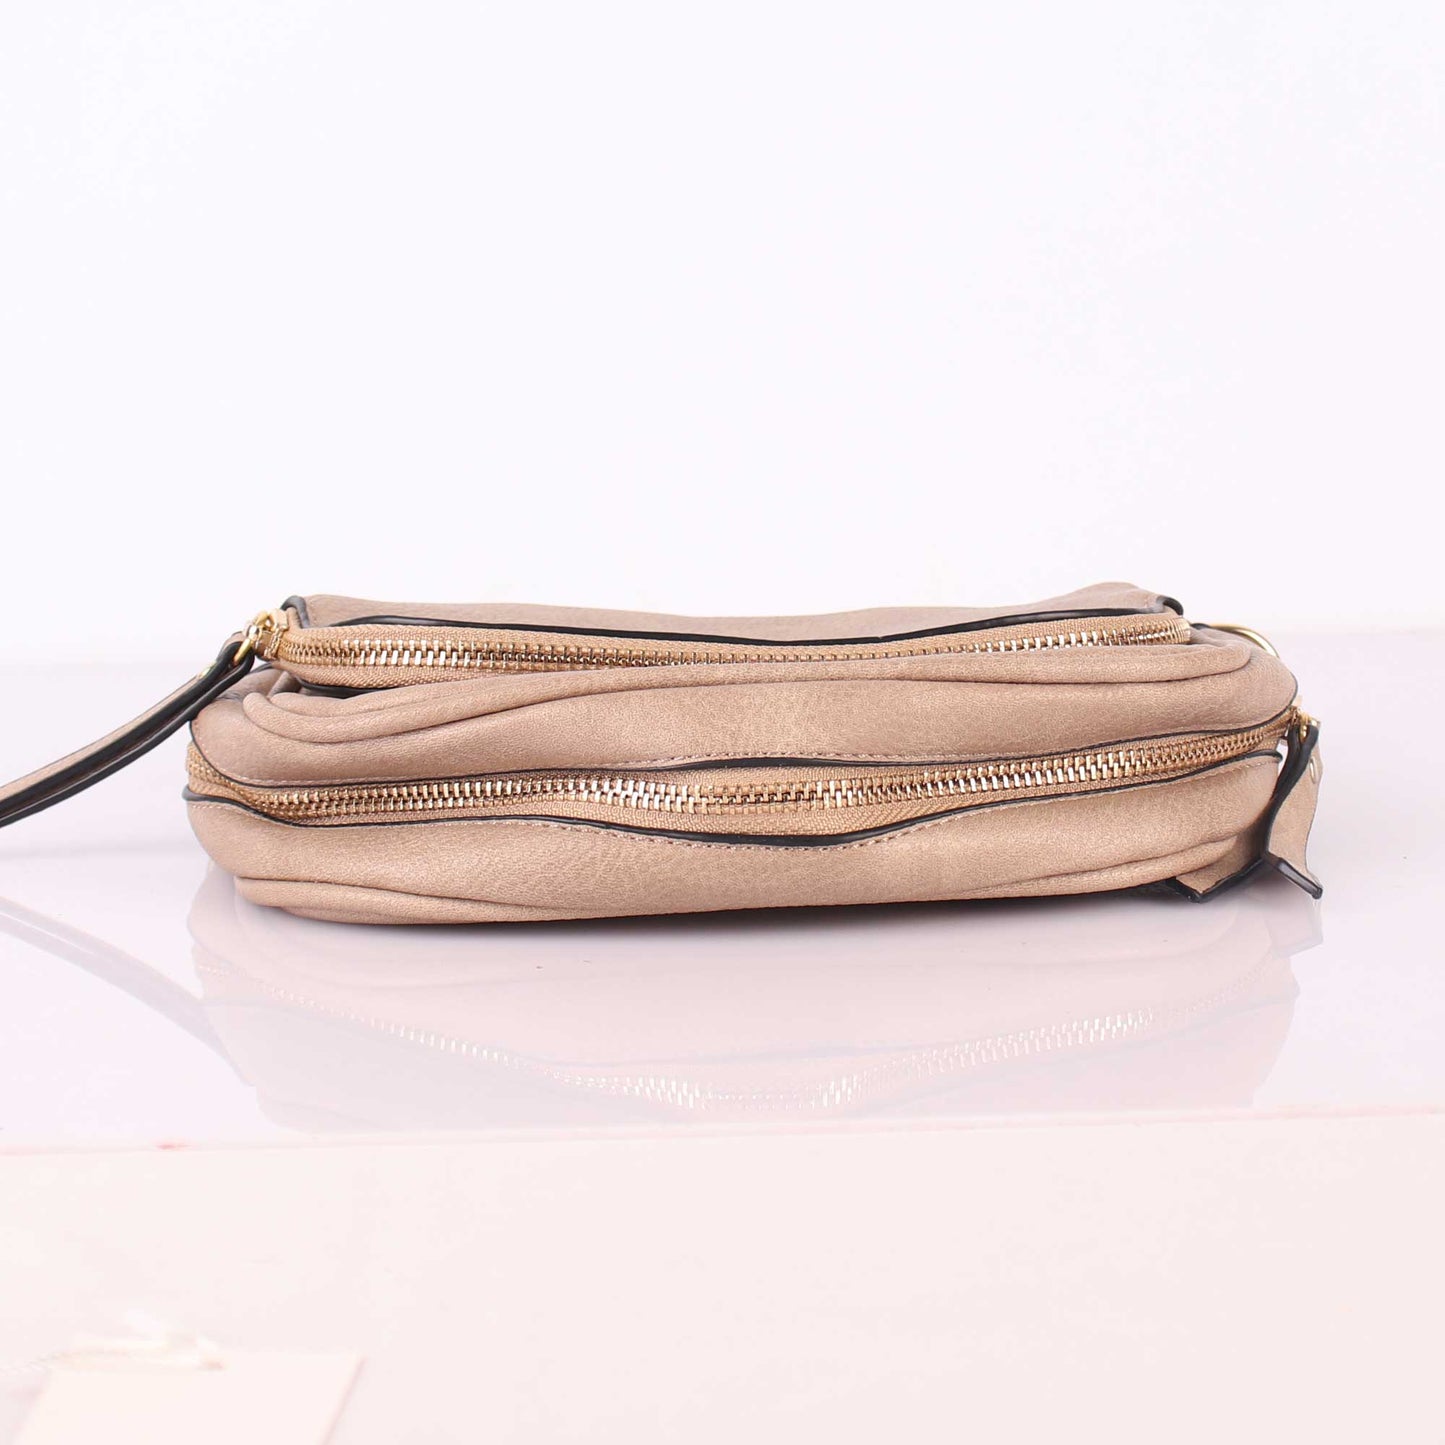 The Classic conventional Stylish Brown Sling Bag